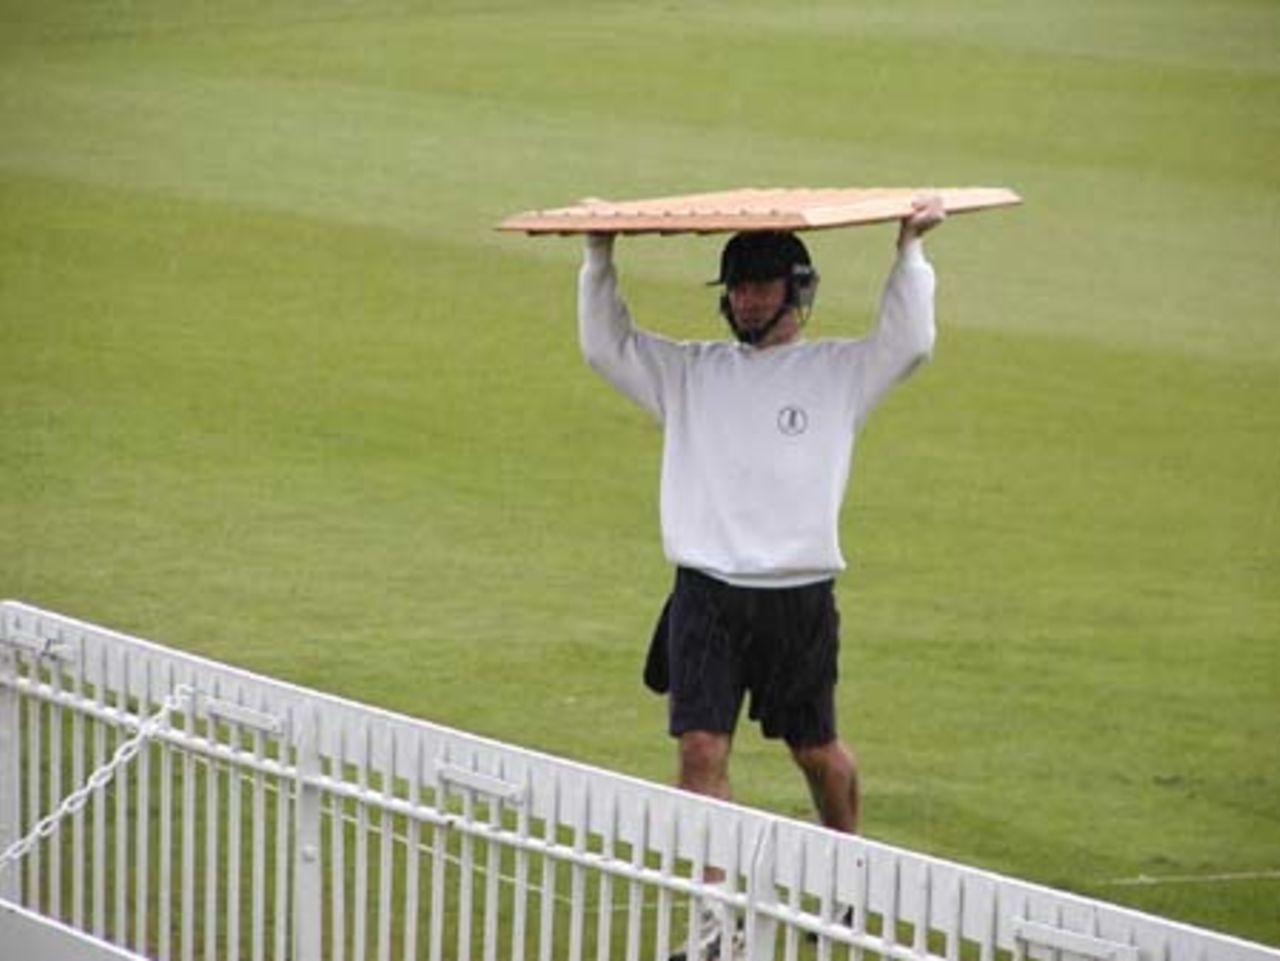 Andy Bones, Oxford UCCE wicket-keeper protects himself from another downpour